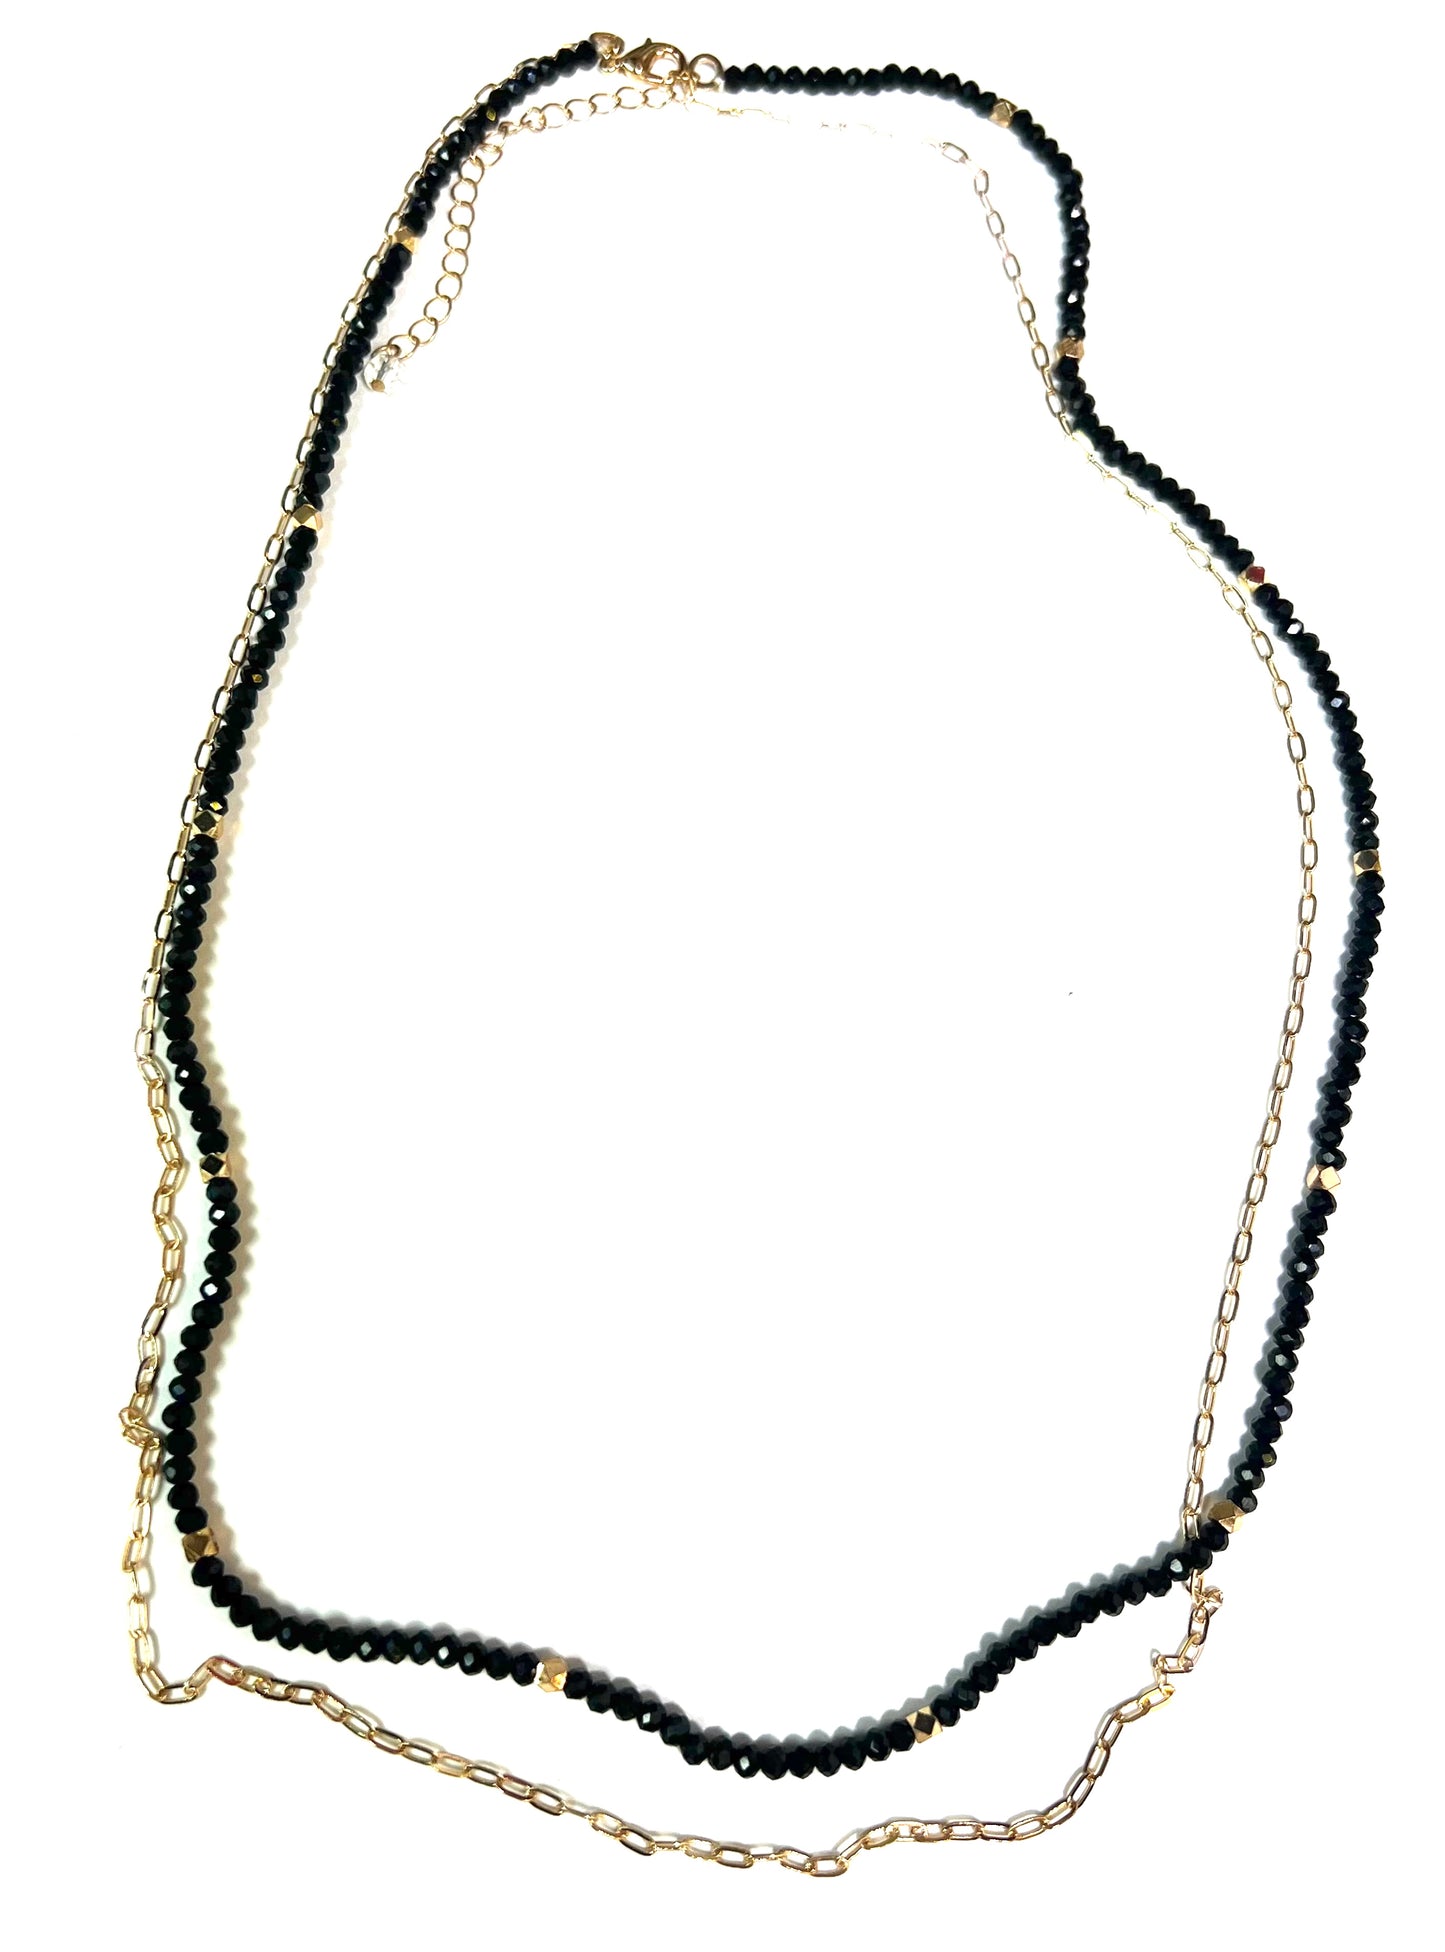 Black Bead & Gold Chain Double Layer Necklace-Necklace-Southern Grace Wholesale--The Twisted Chandelier